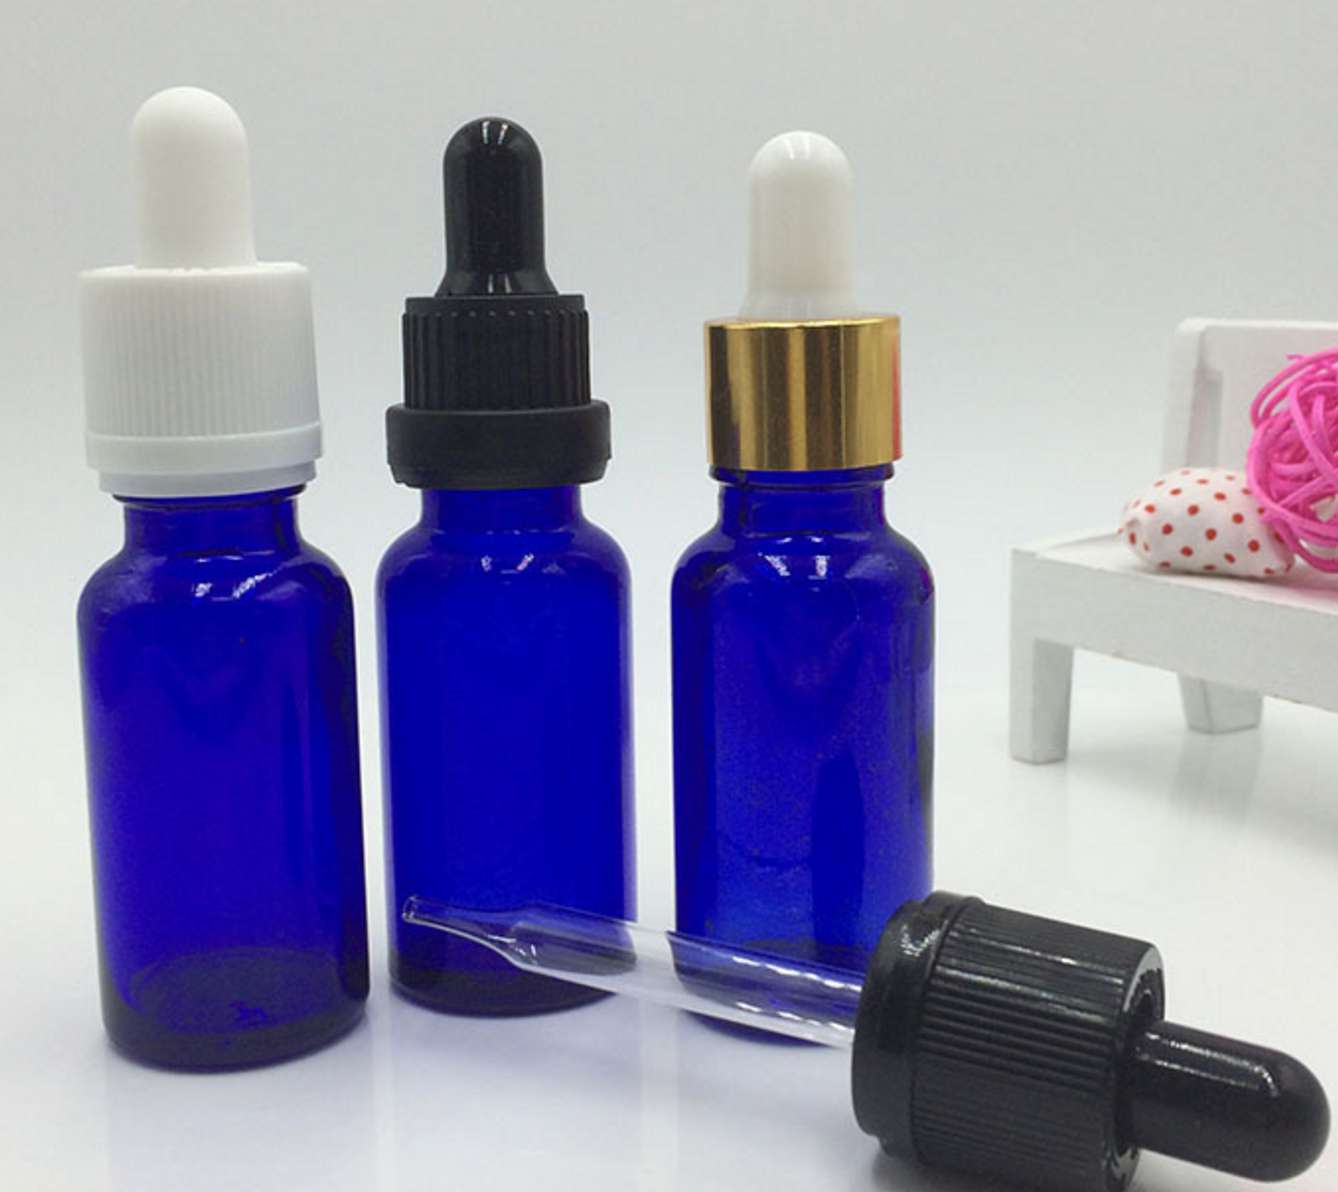 20ml blue glass dropper bottle for aromatherapy and essential oils